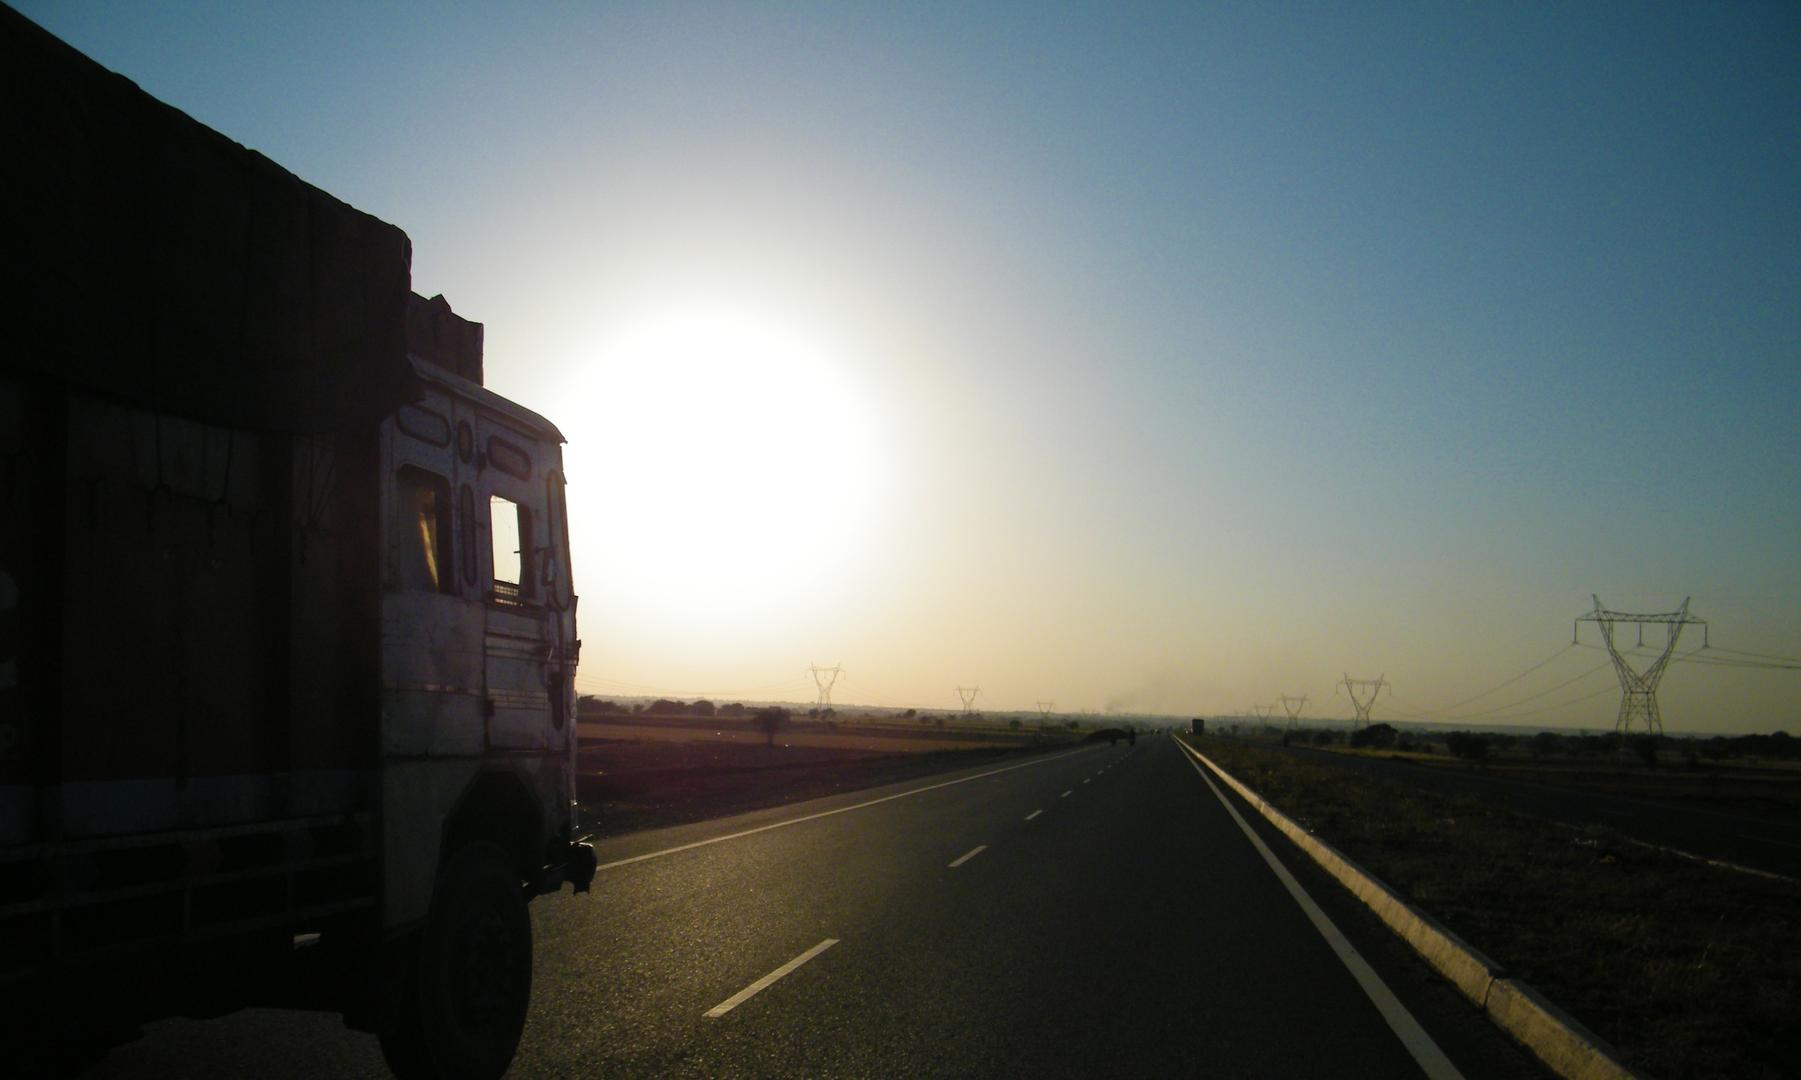 Lorry driving into either sunset or sunrise